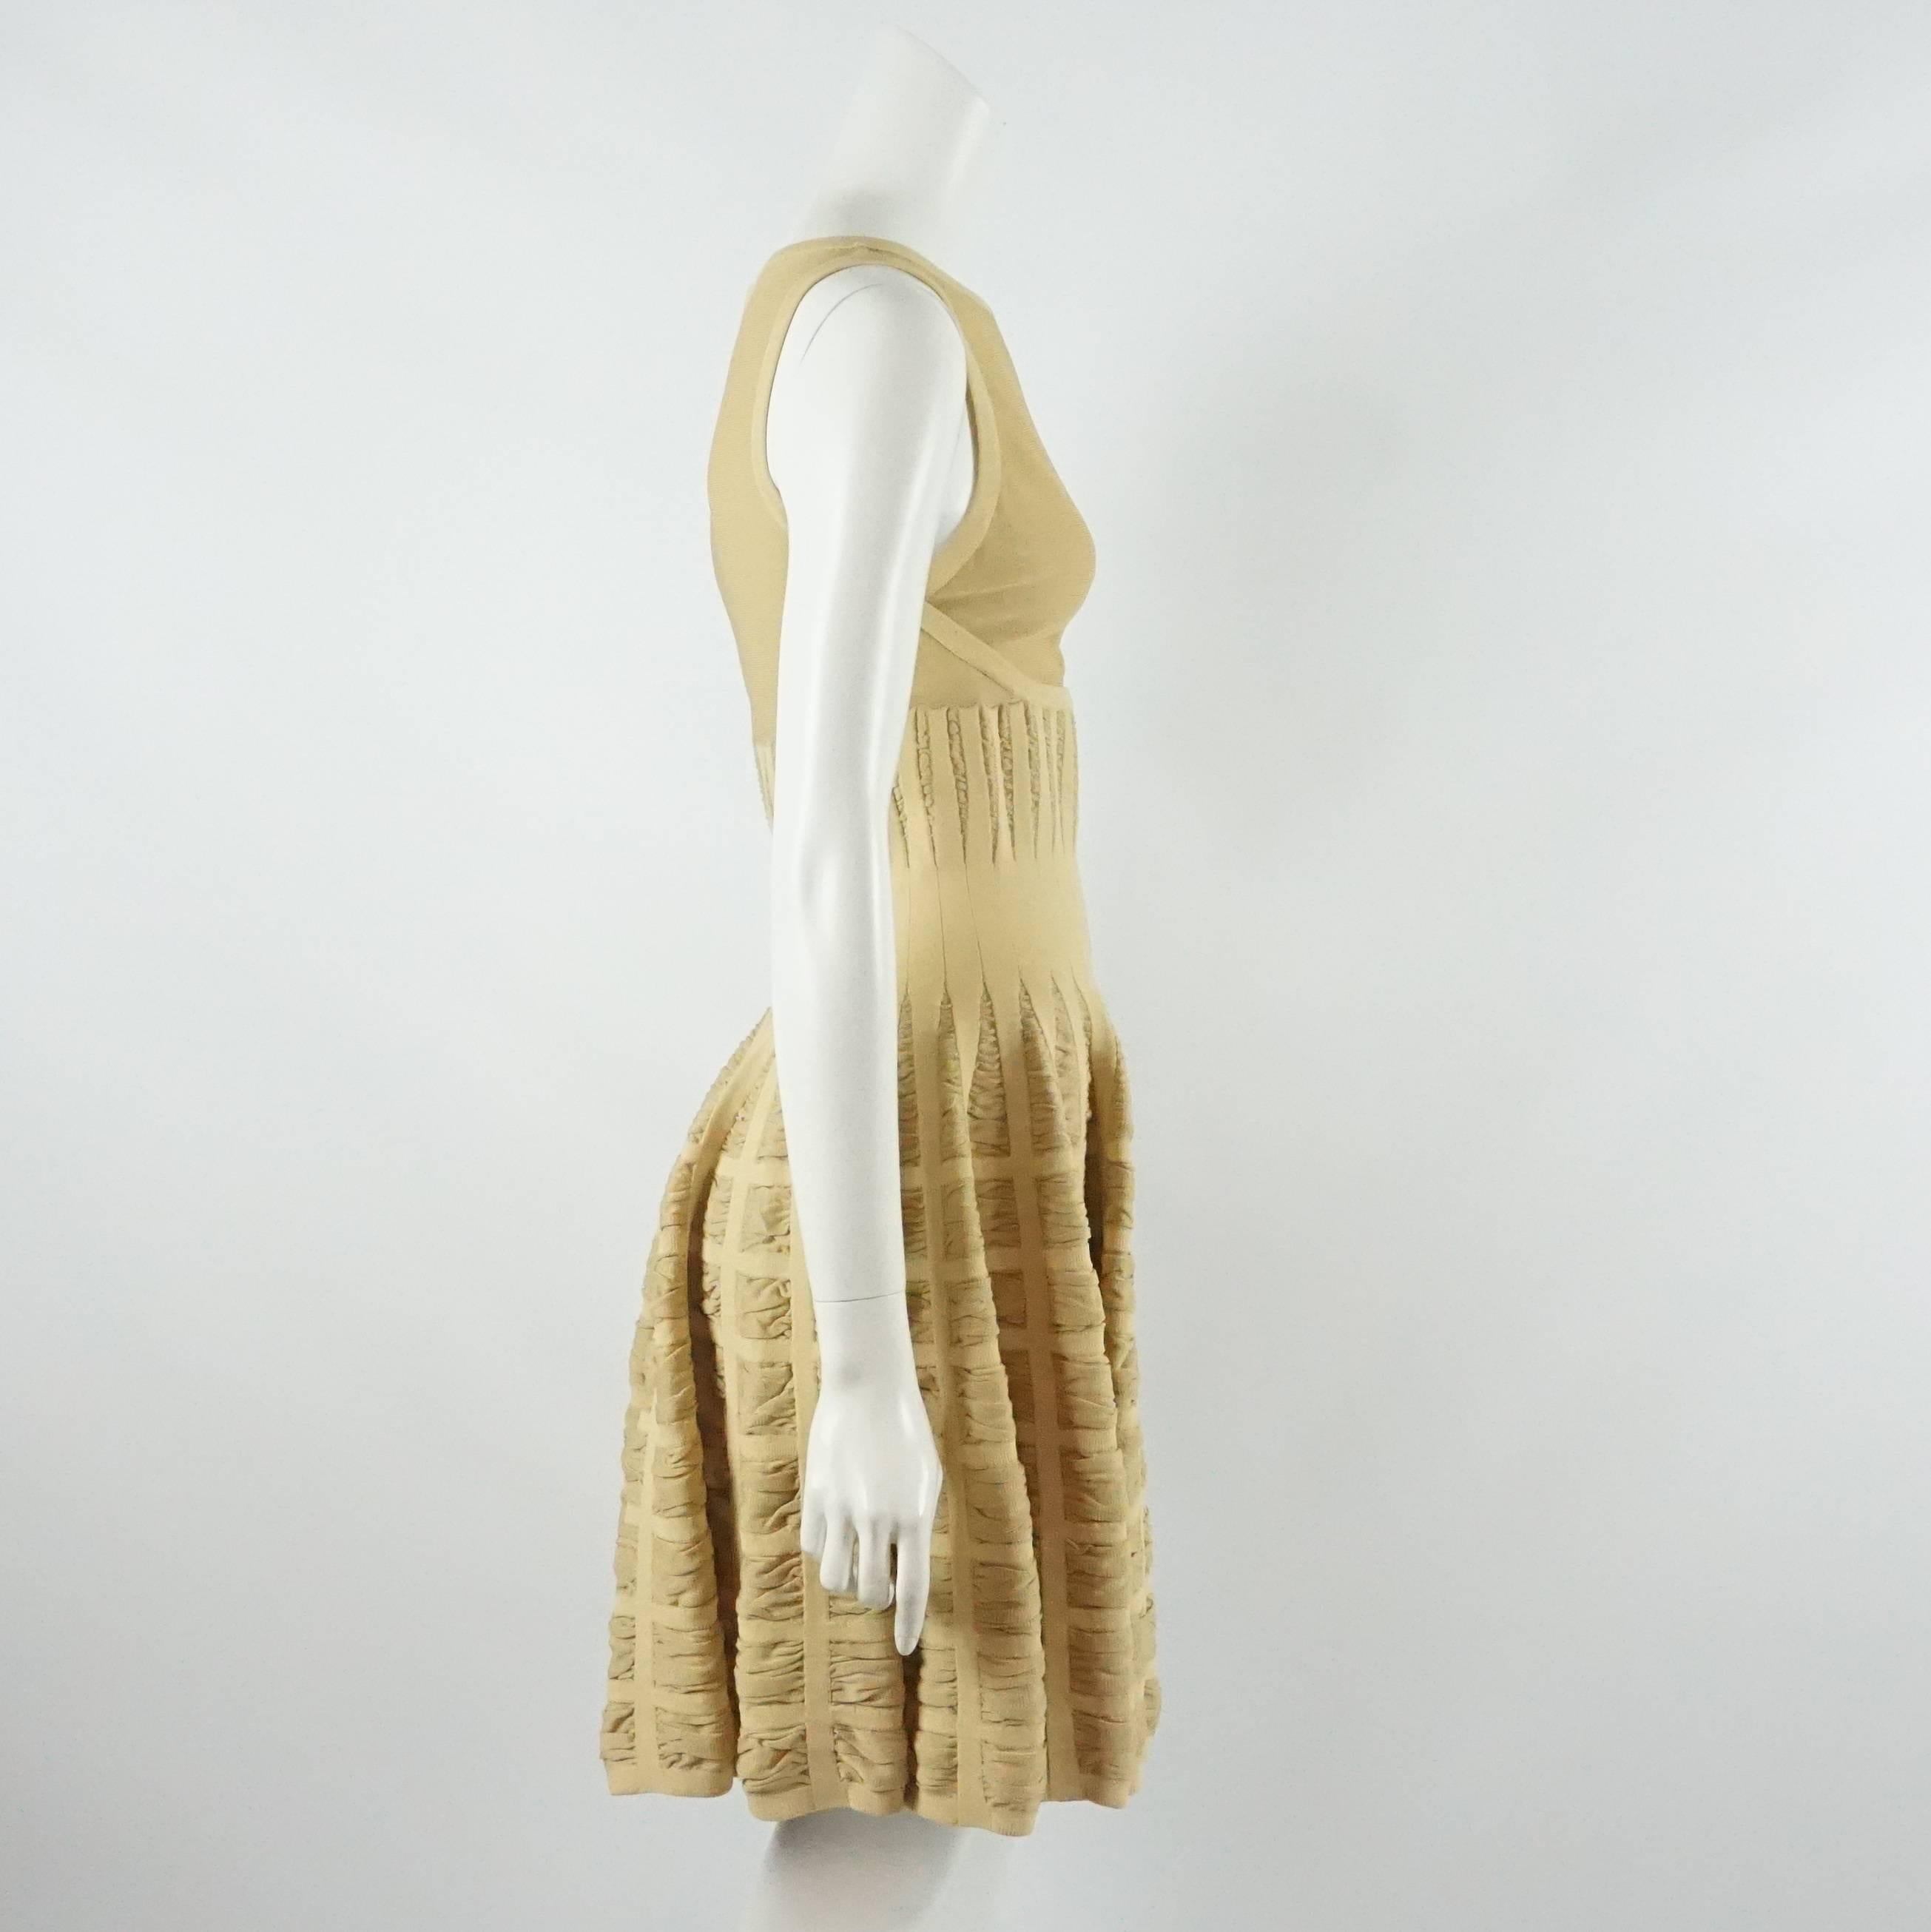 Alaia Camel Silk Knit Sleeveless Flare Dress - 40. This sleeveless scoop neck silk knit blend dress is a pretty camel color. The top bodice is mesh, and the rest of the dress has a textured knit look to it and is fitted to the waist and flares out